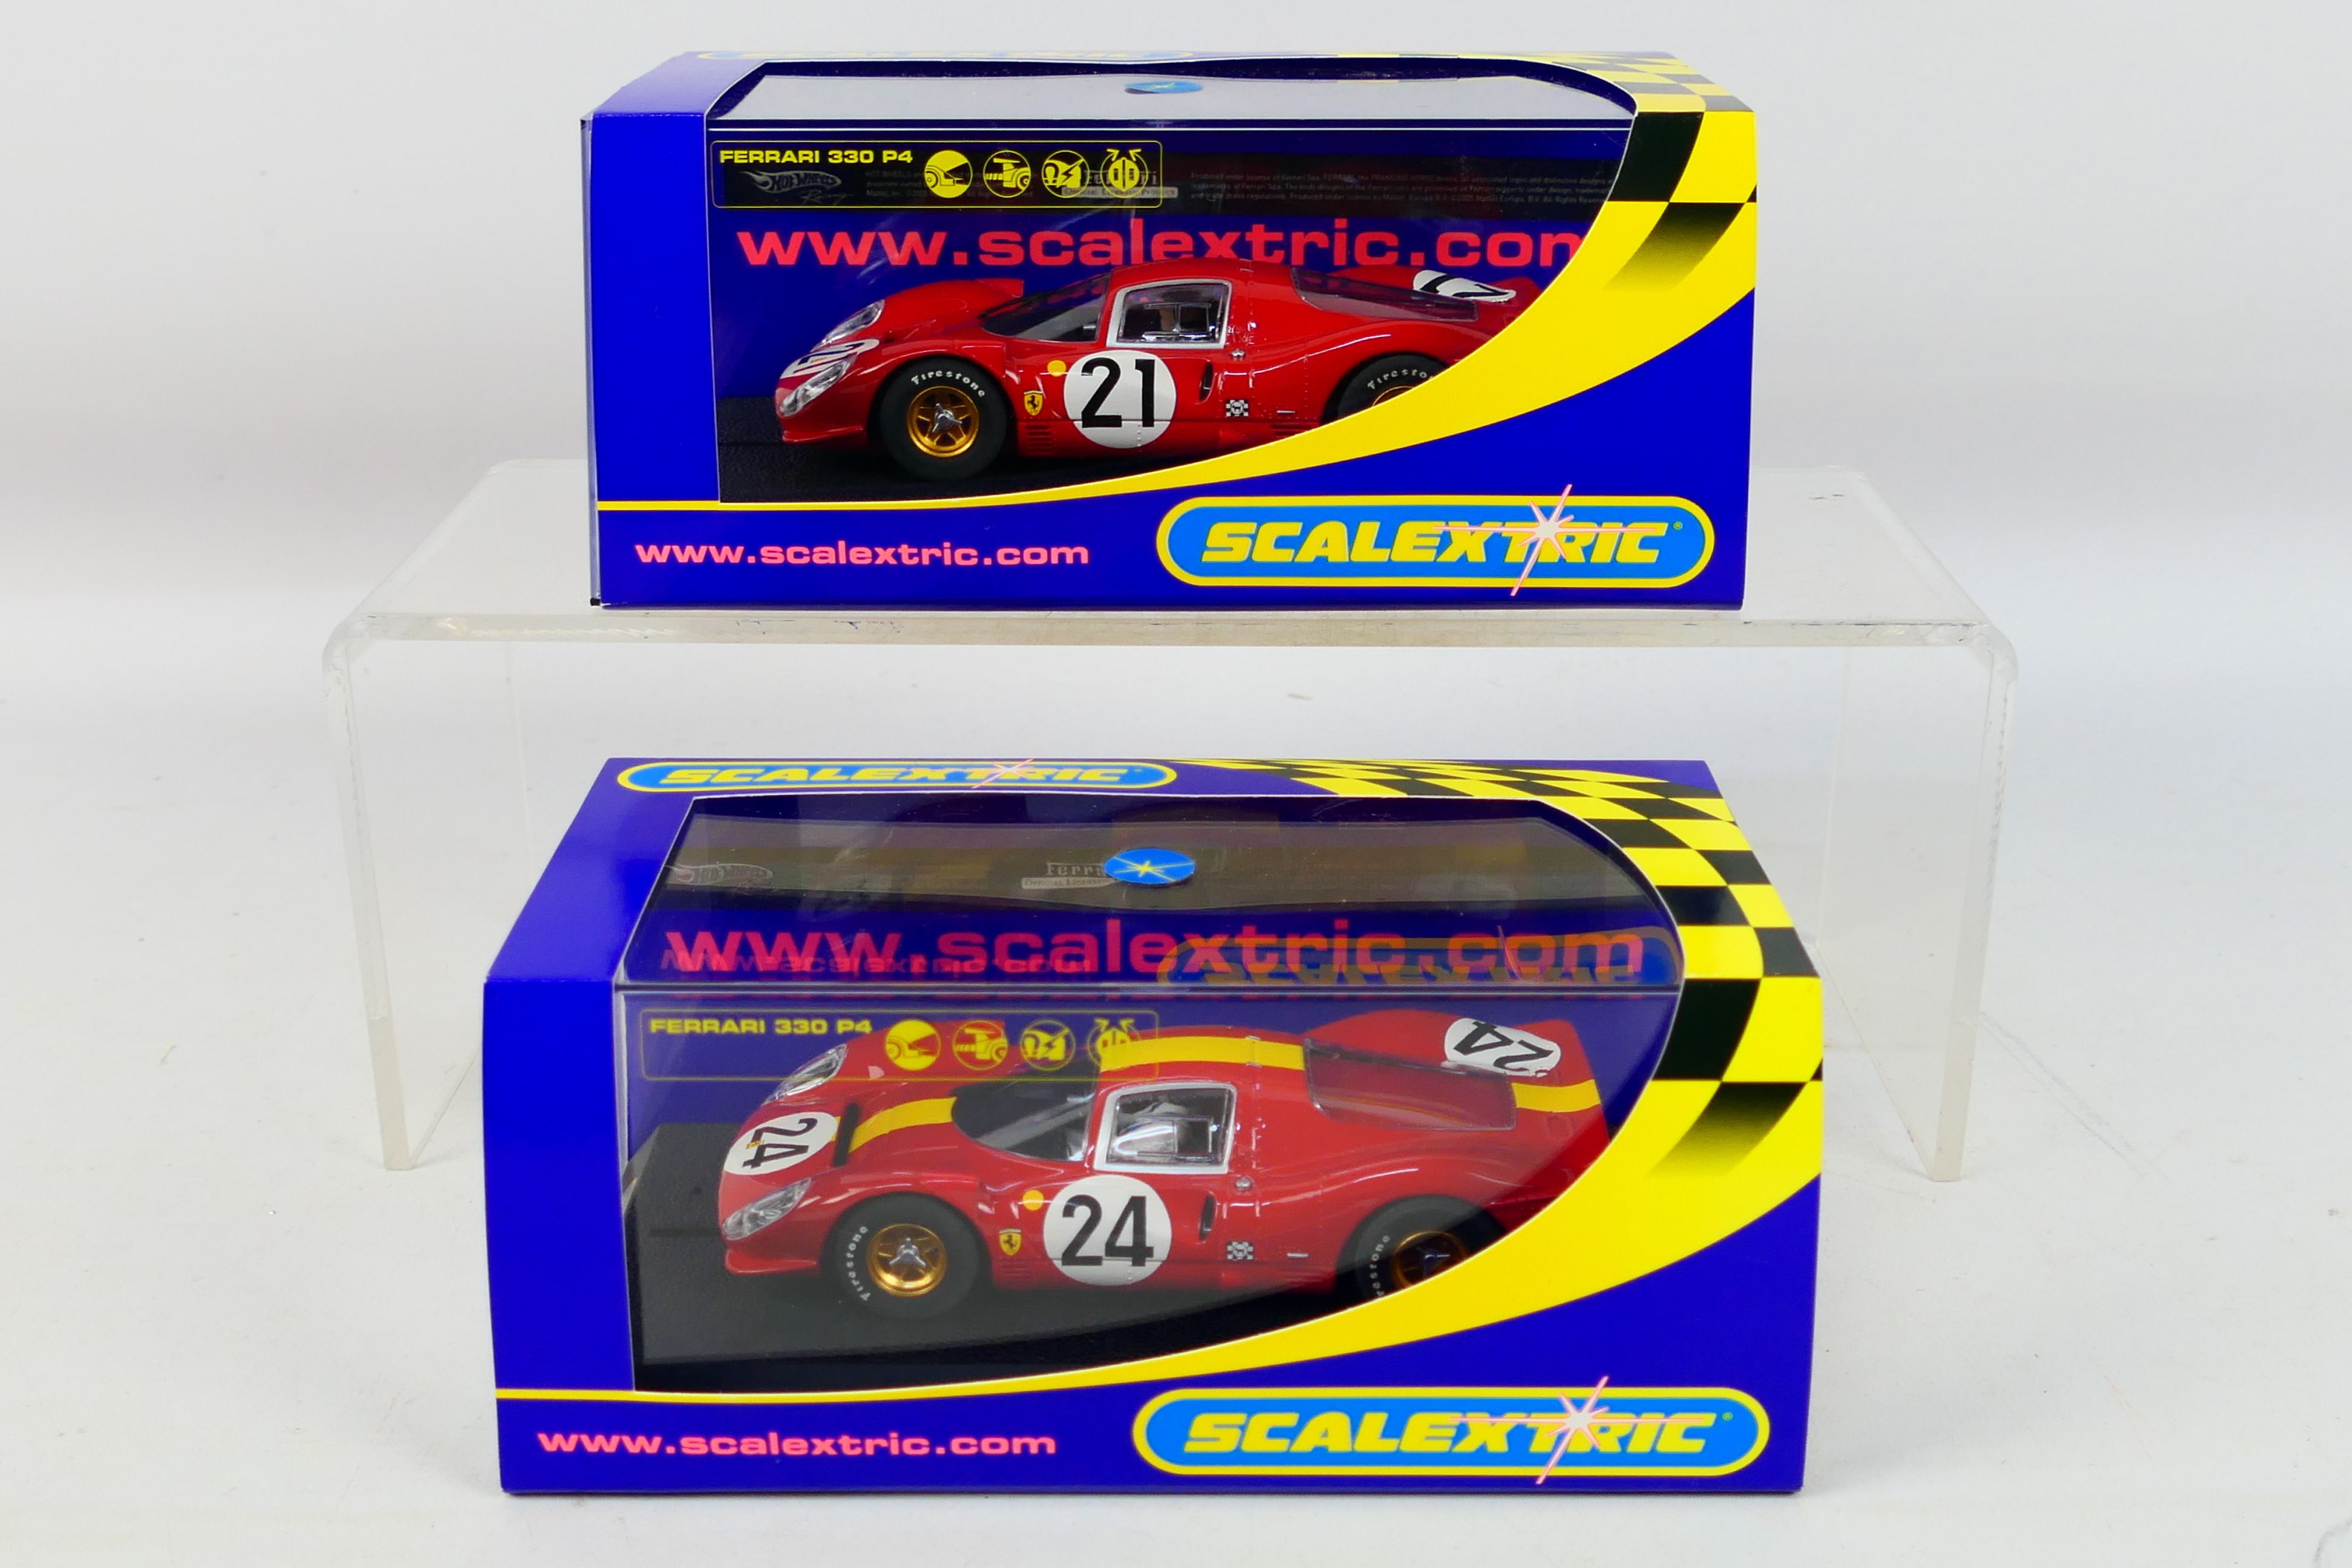 Scalextric - Two boxed Scalextric Ferrari 330 P4 slot cars.